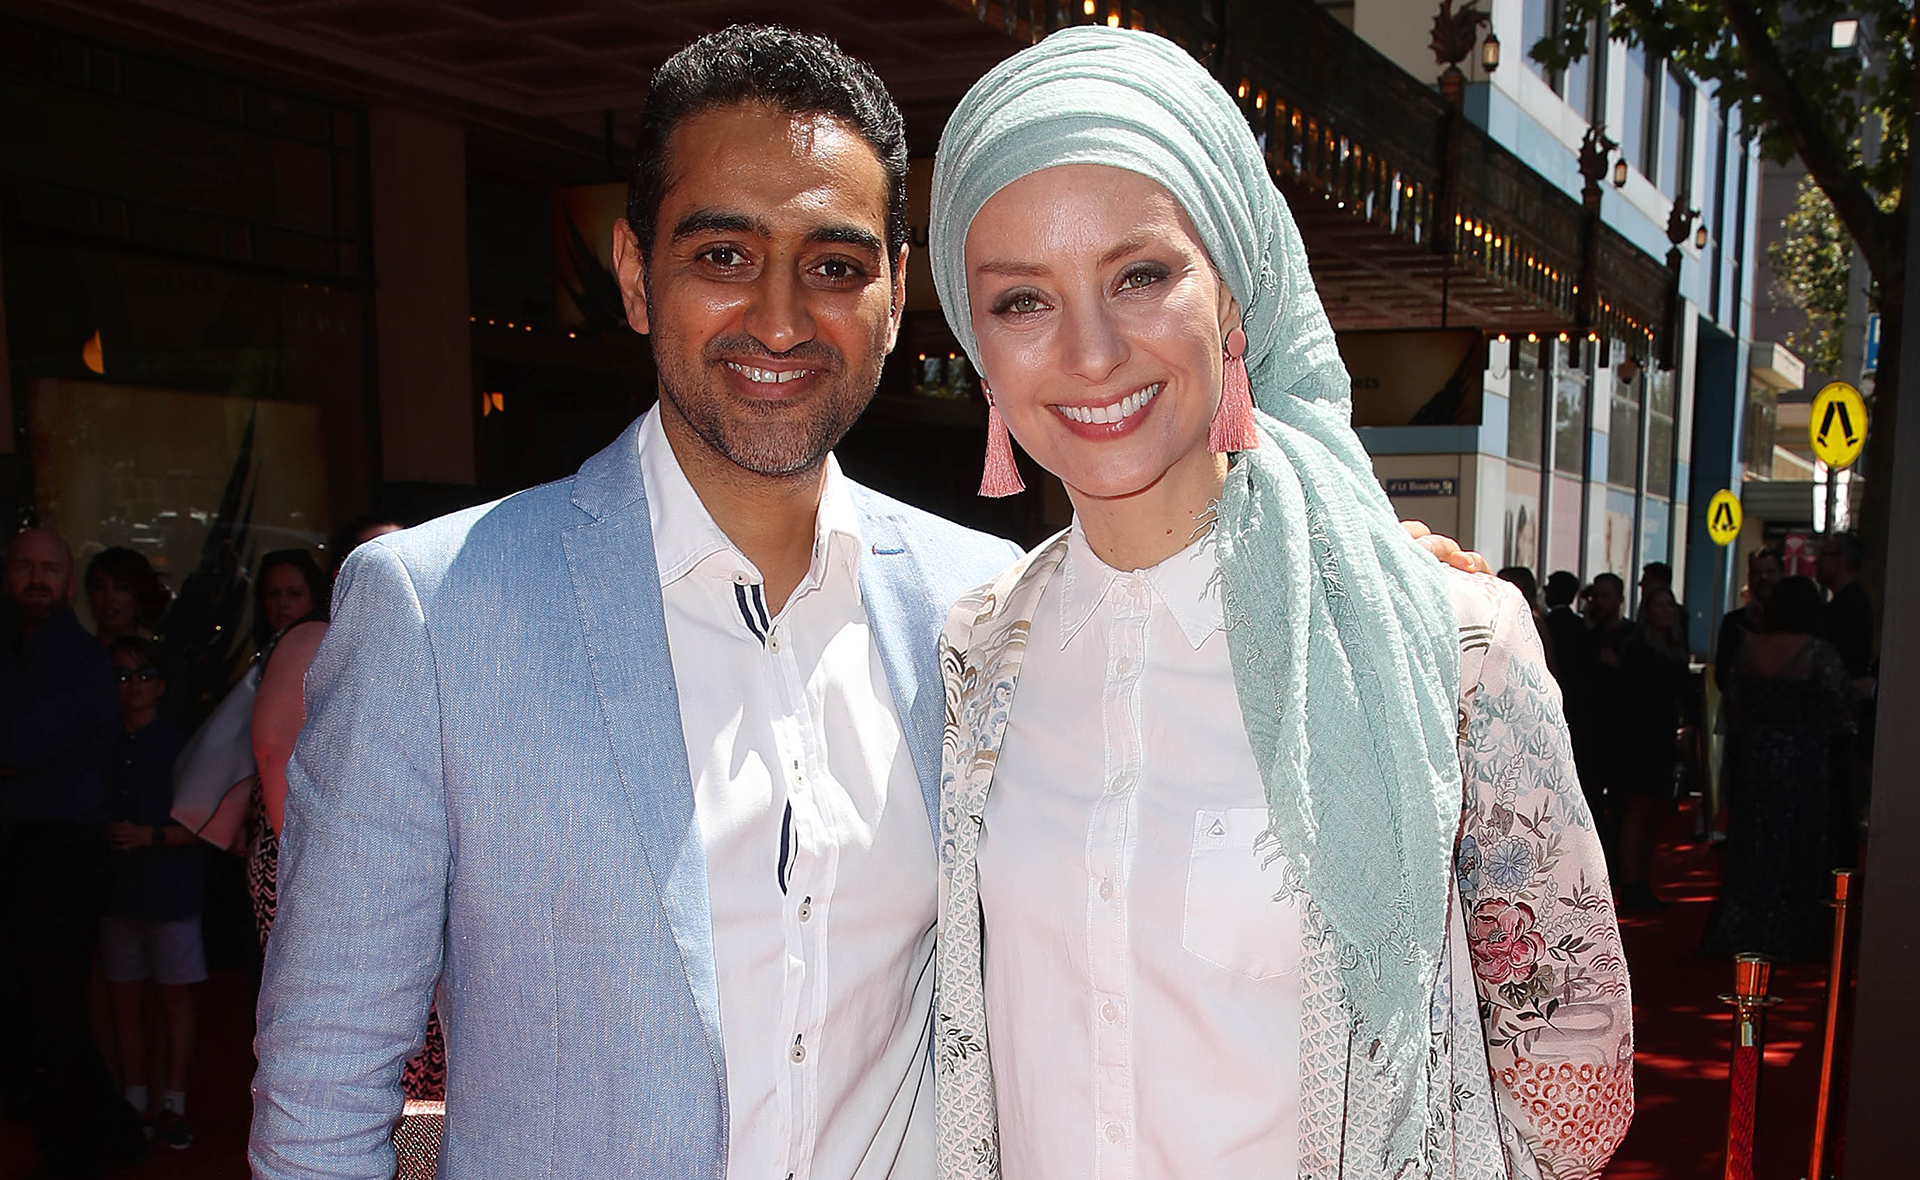 Susan Carland just shared the most glorious throwback of her and Waleed Aly’s wedding